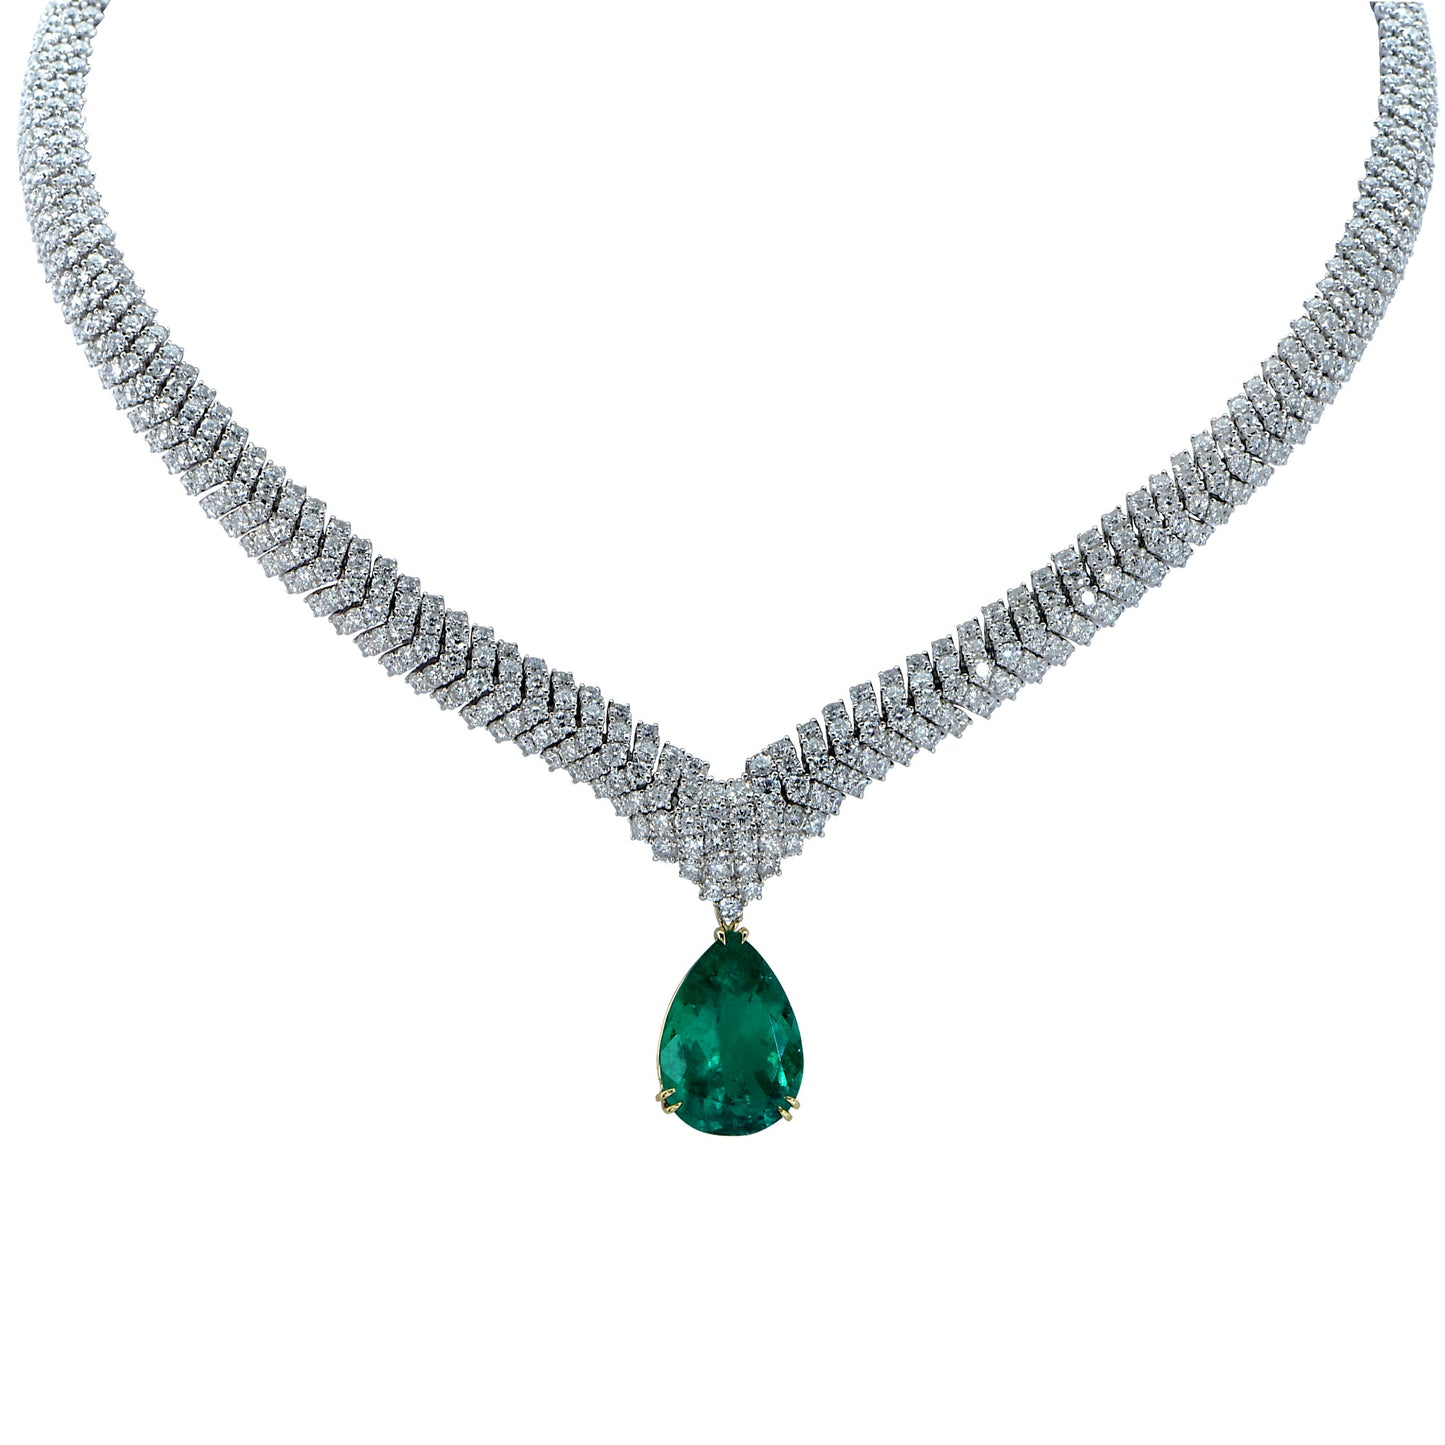 1990s 18KT White Gold Colombian Emerald & Diamond Necklace front view